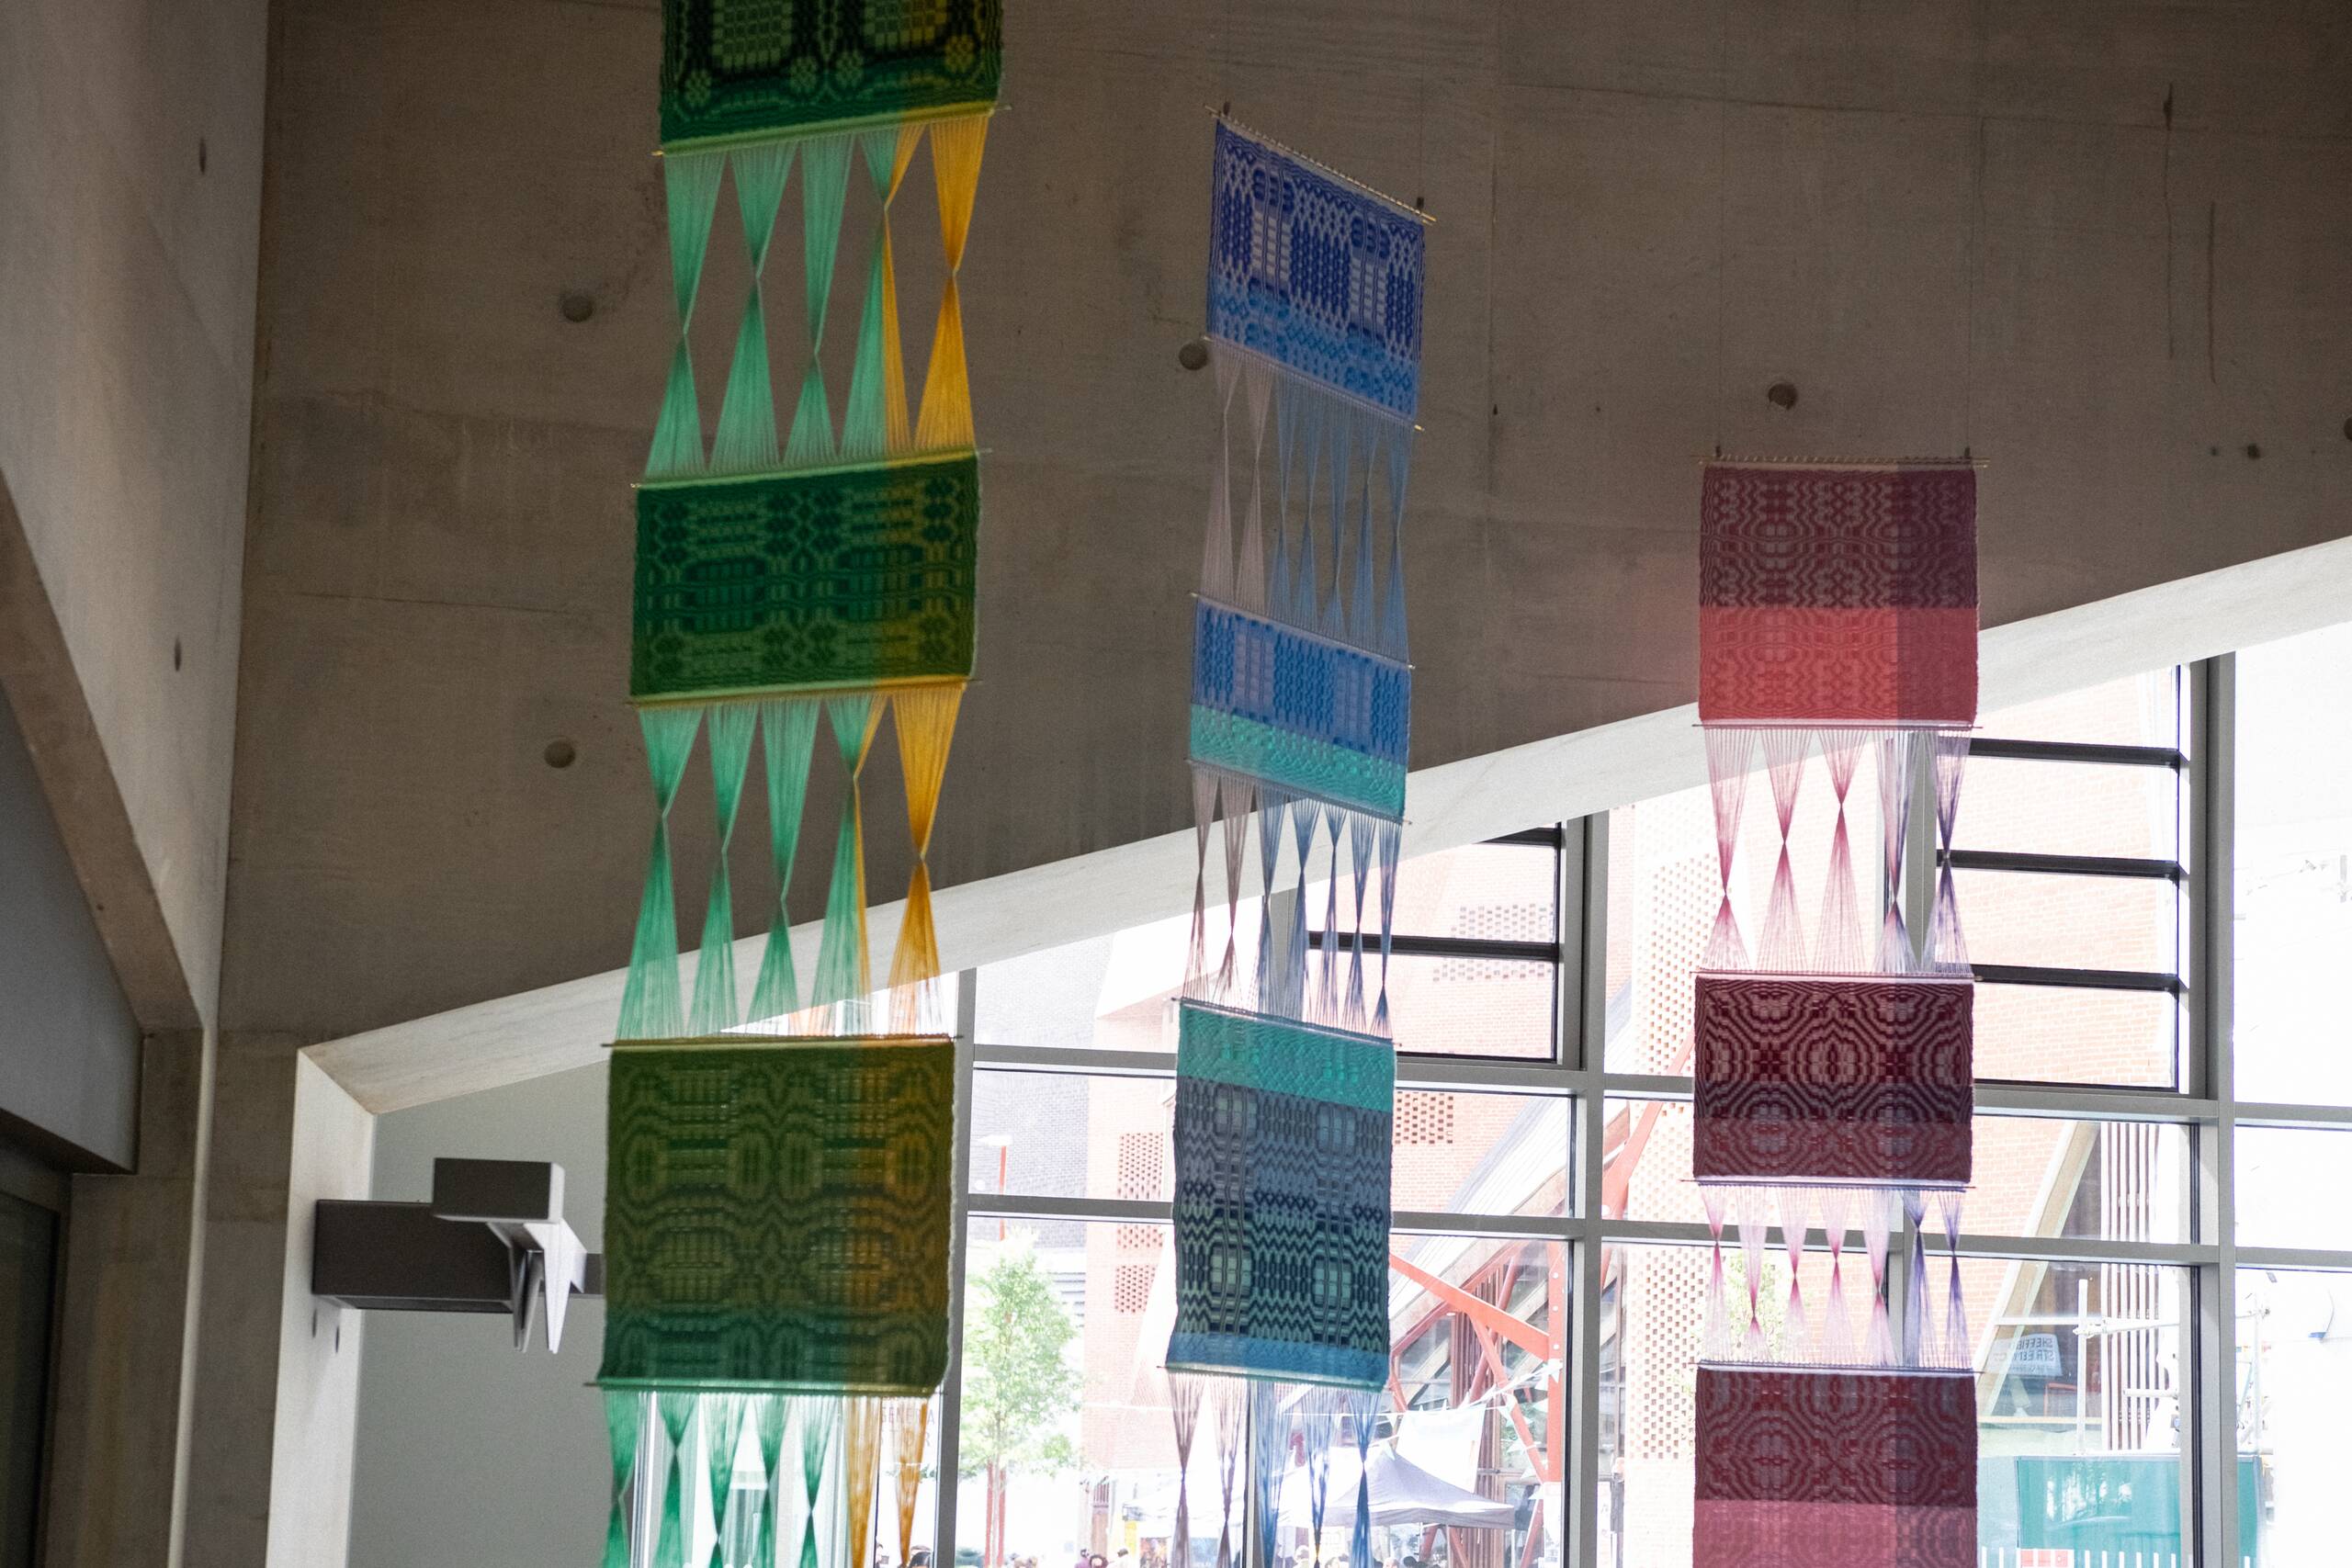 Interaction of pattern [systems of influence in red, green, & blue], Hand-woven cotton yarn, brass, aluminum (commissioned by Artiq, permanent installation at London School of Economics Marshall Building), 2022